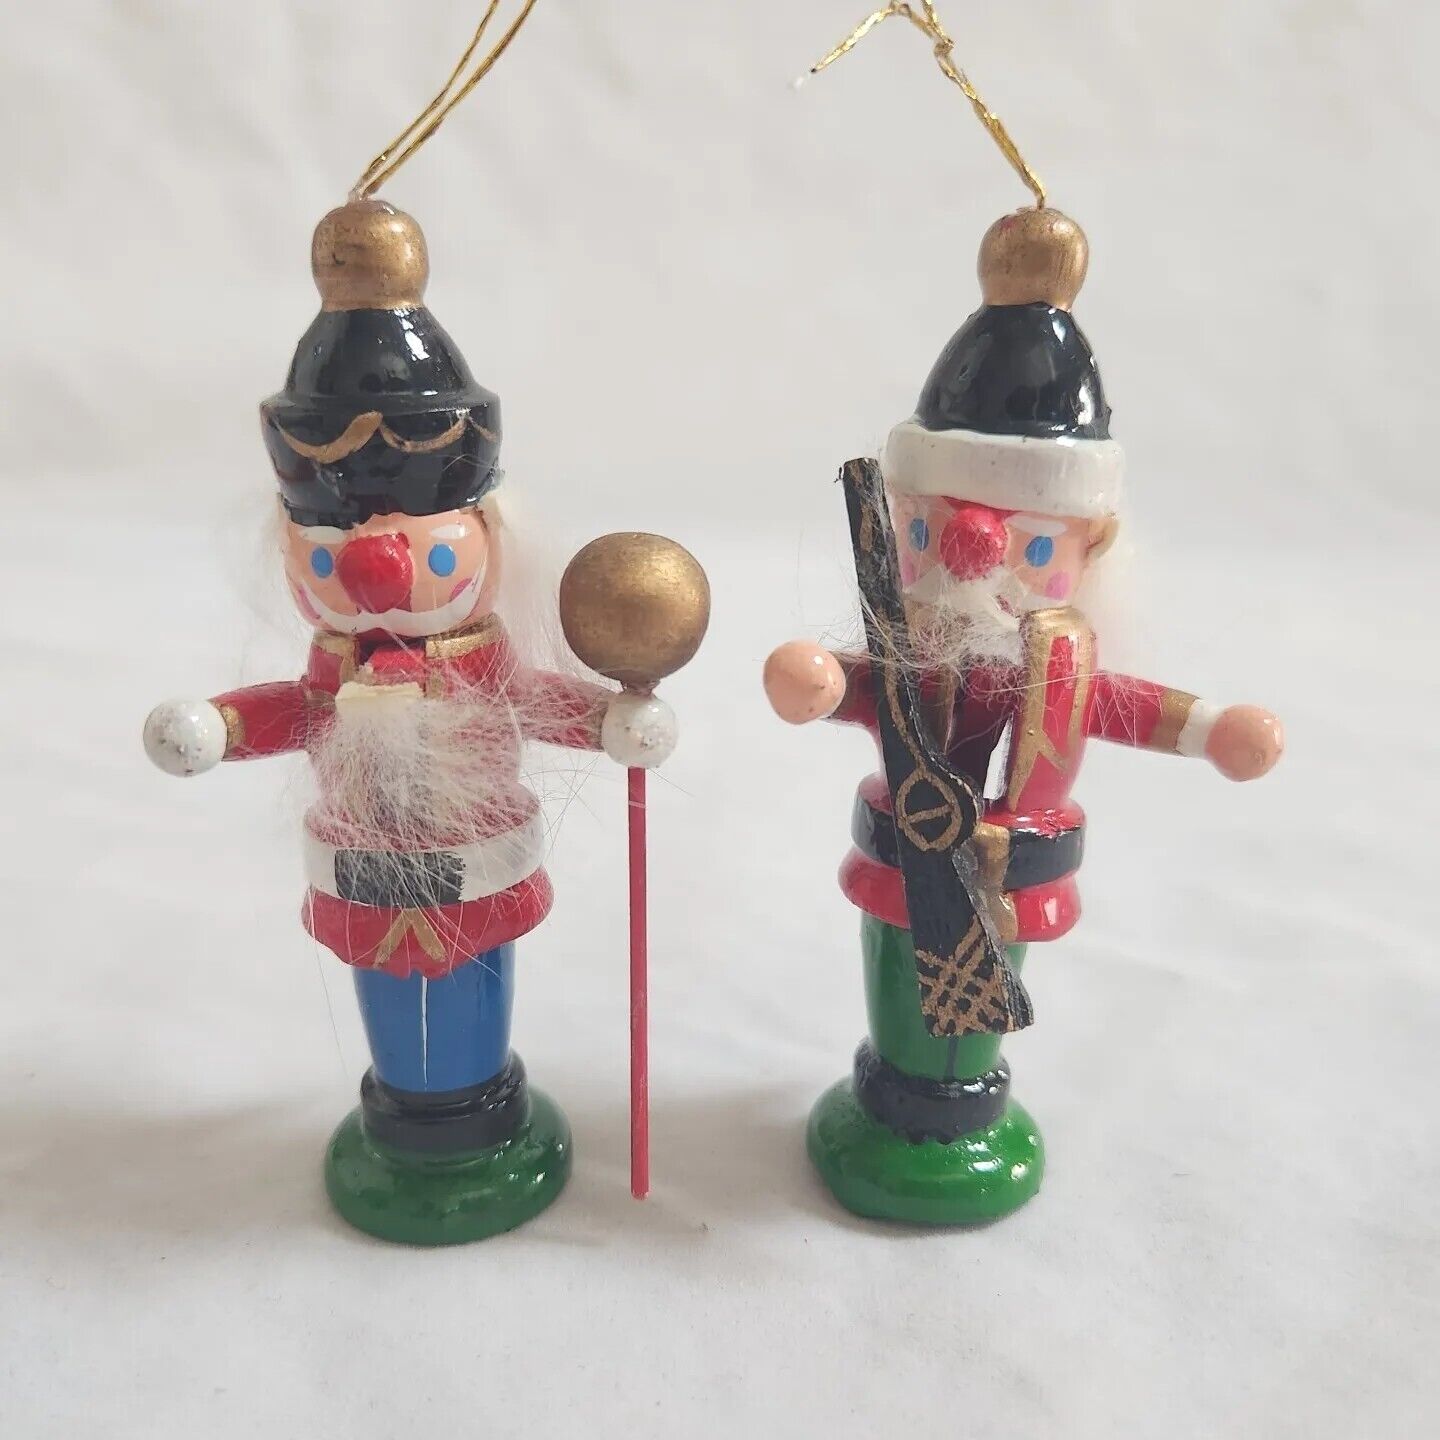 Pair Wooden Nutcracker Christmas Ornaments Rifle Scepter Vintage AS IS